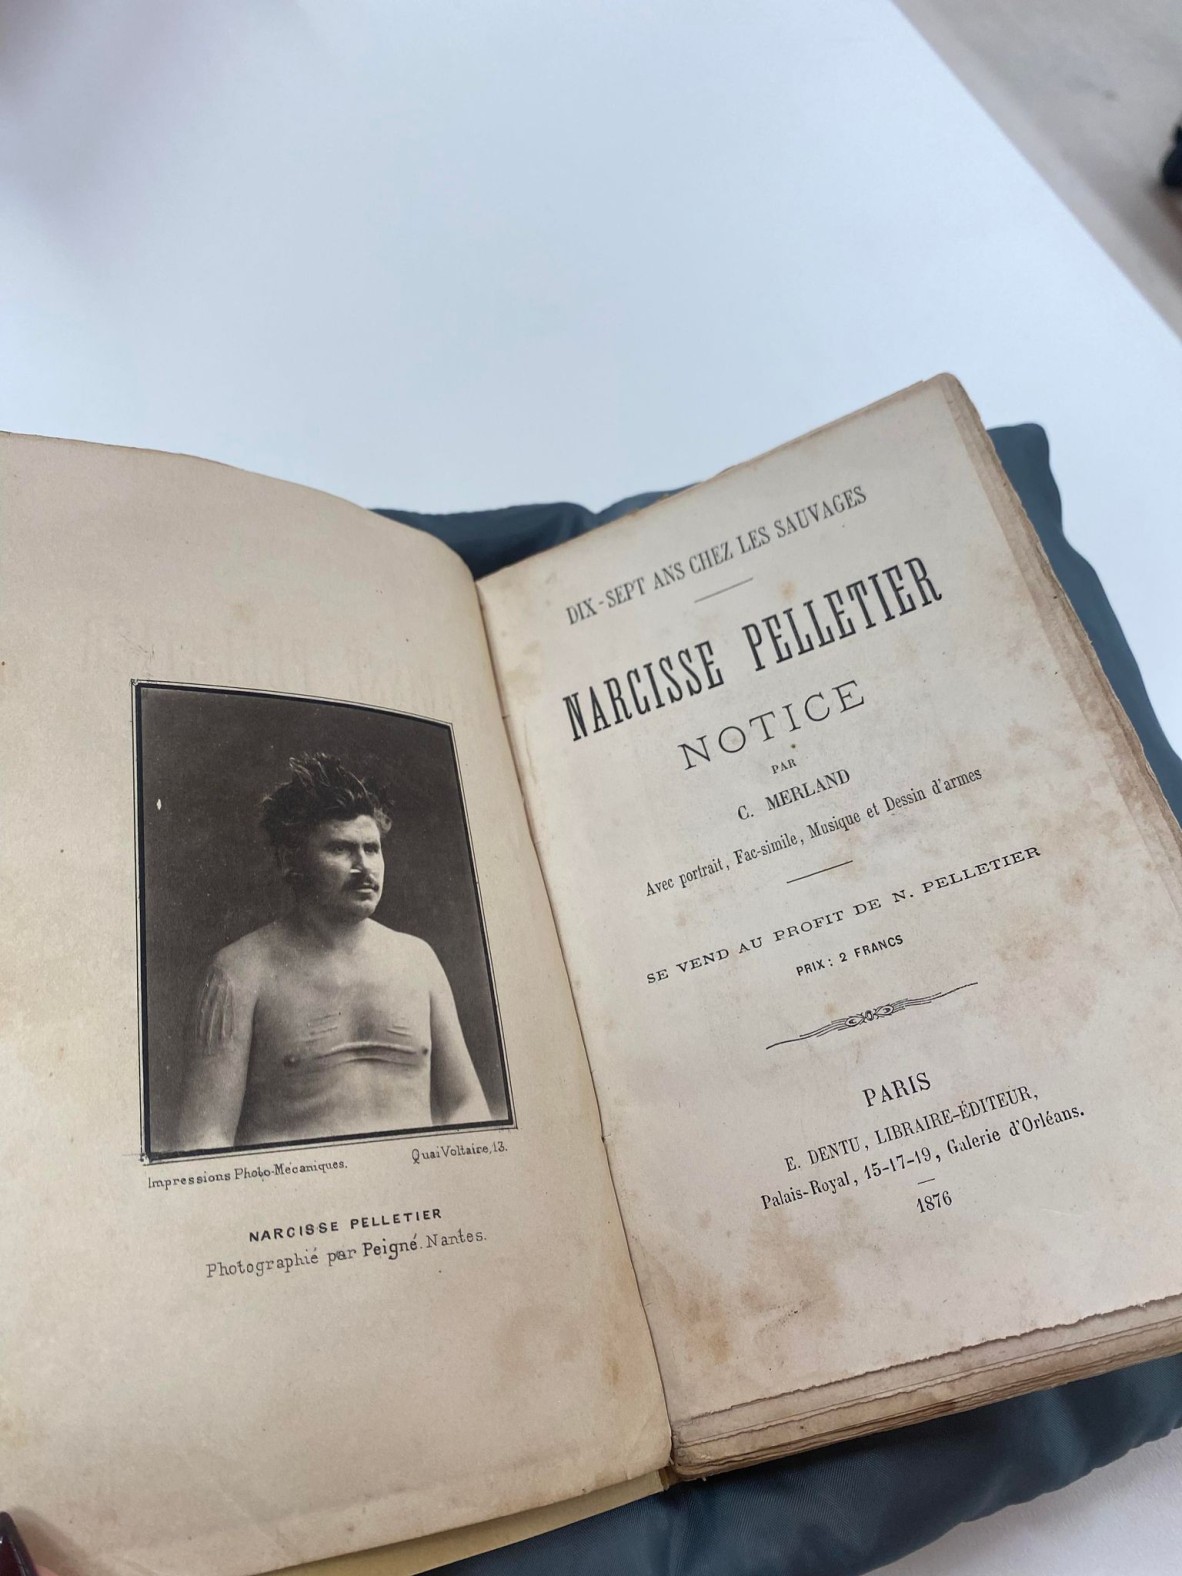 title page of the book of Narcisse Pelletier, including portrait of him featuring his scars